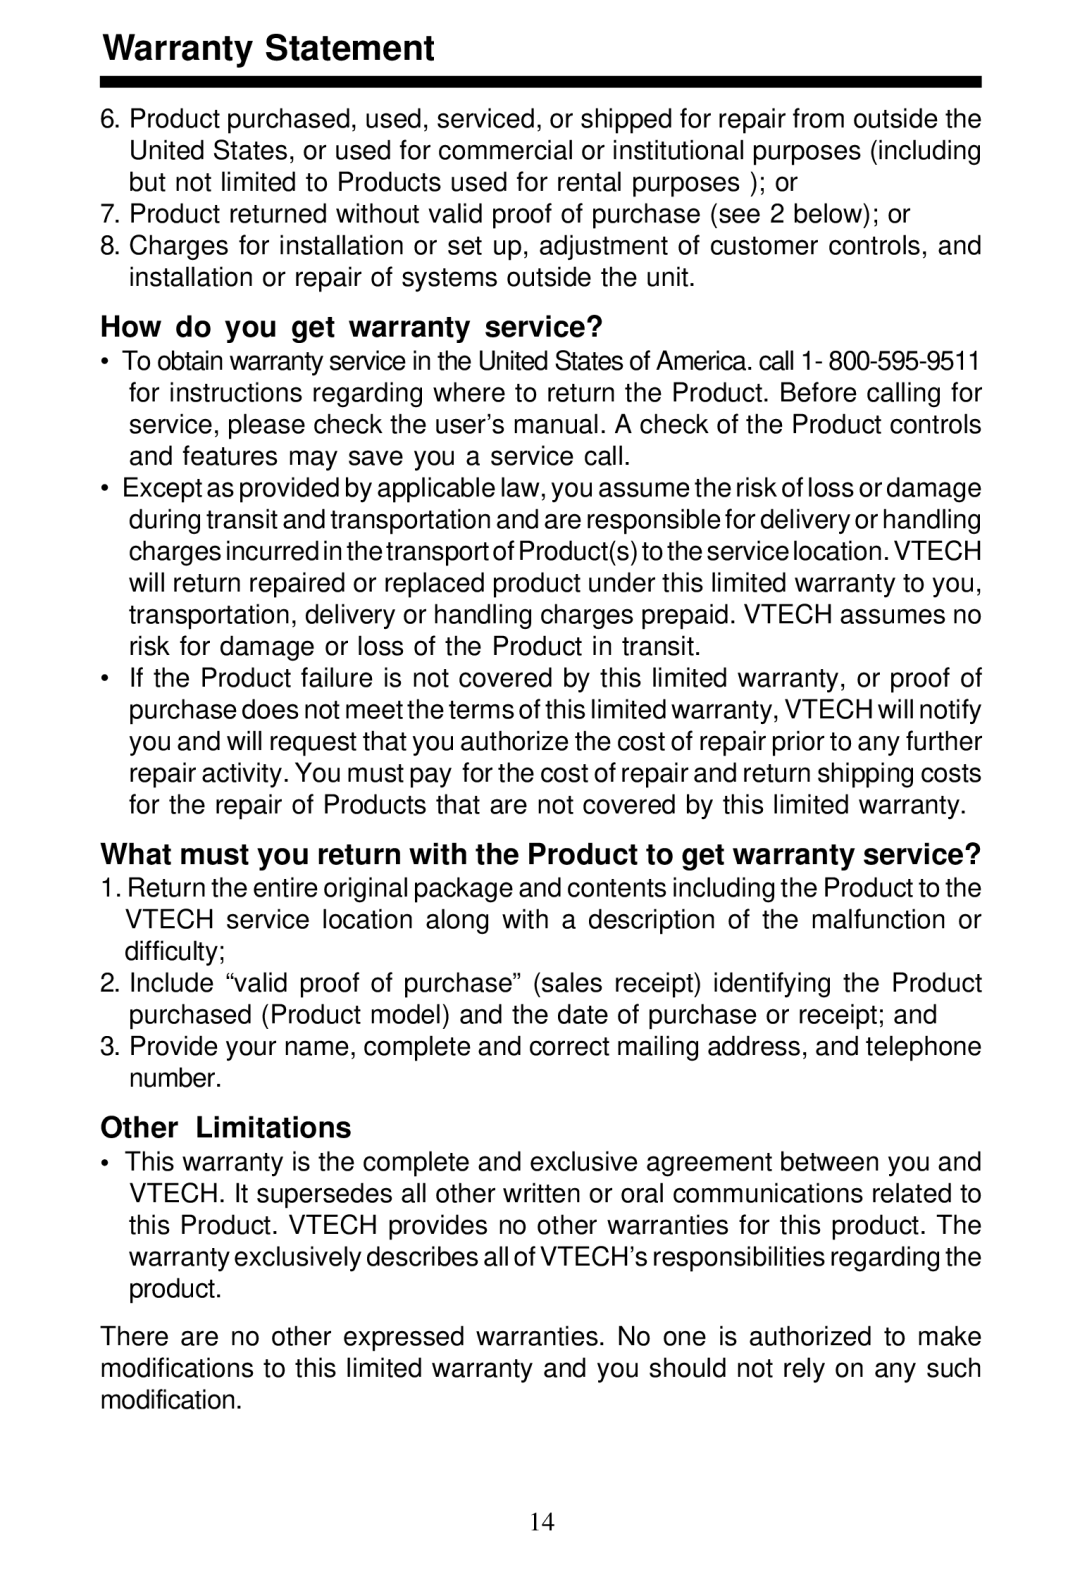 VTech VT5820 user manual How do you get warranty service?, Other Limitations 